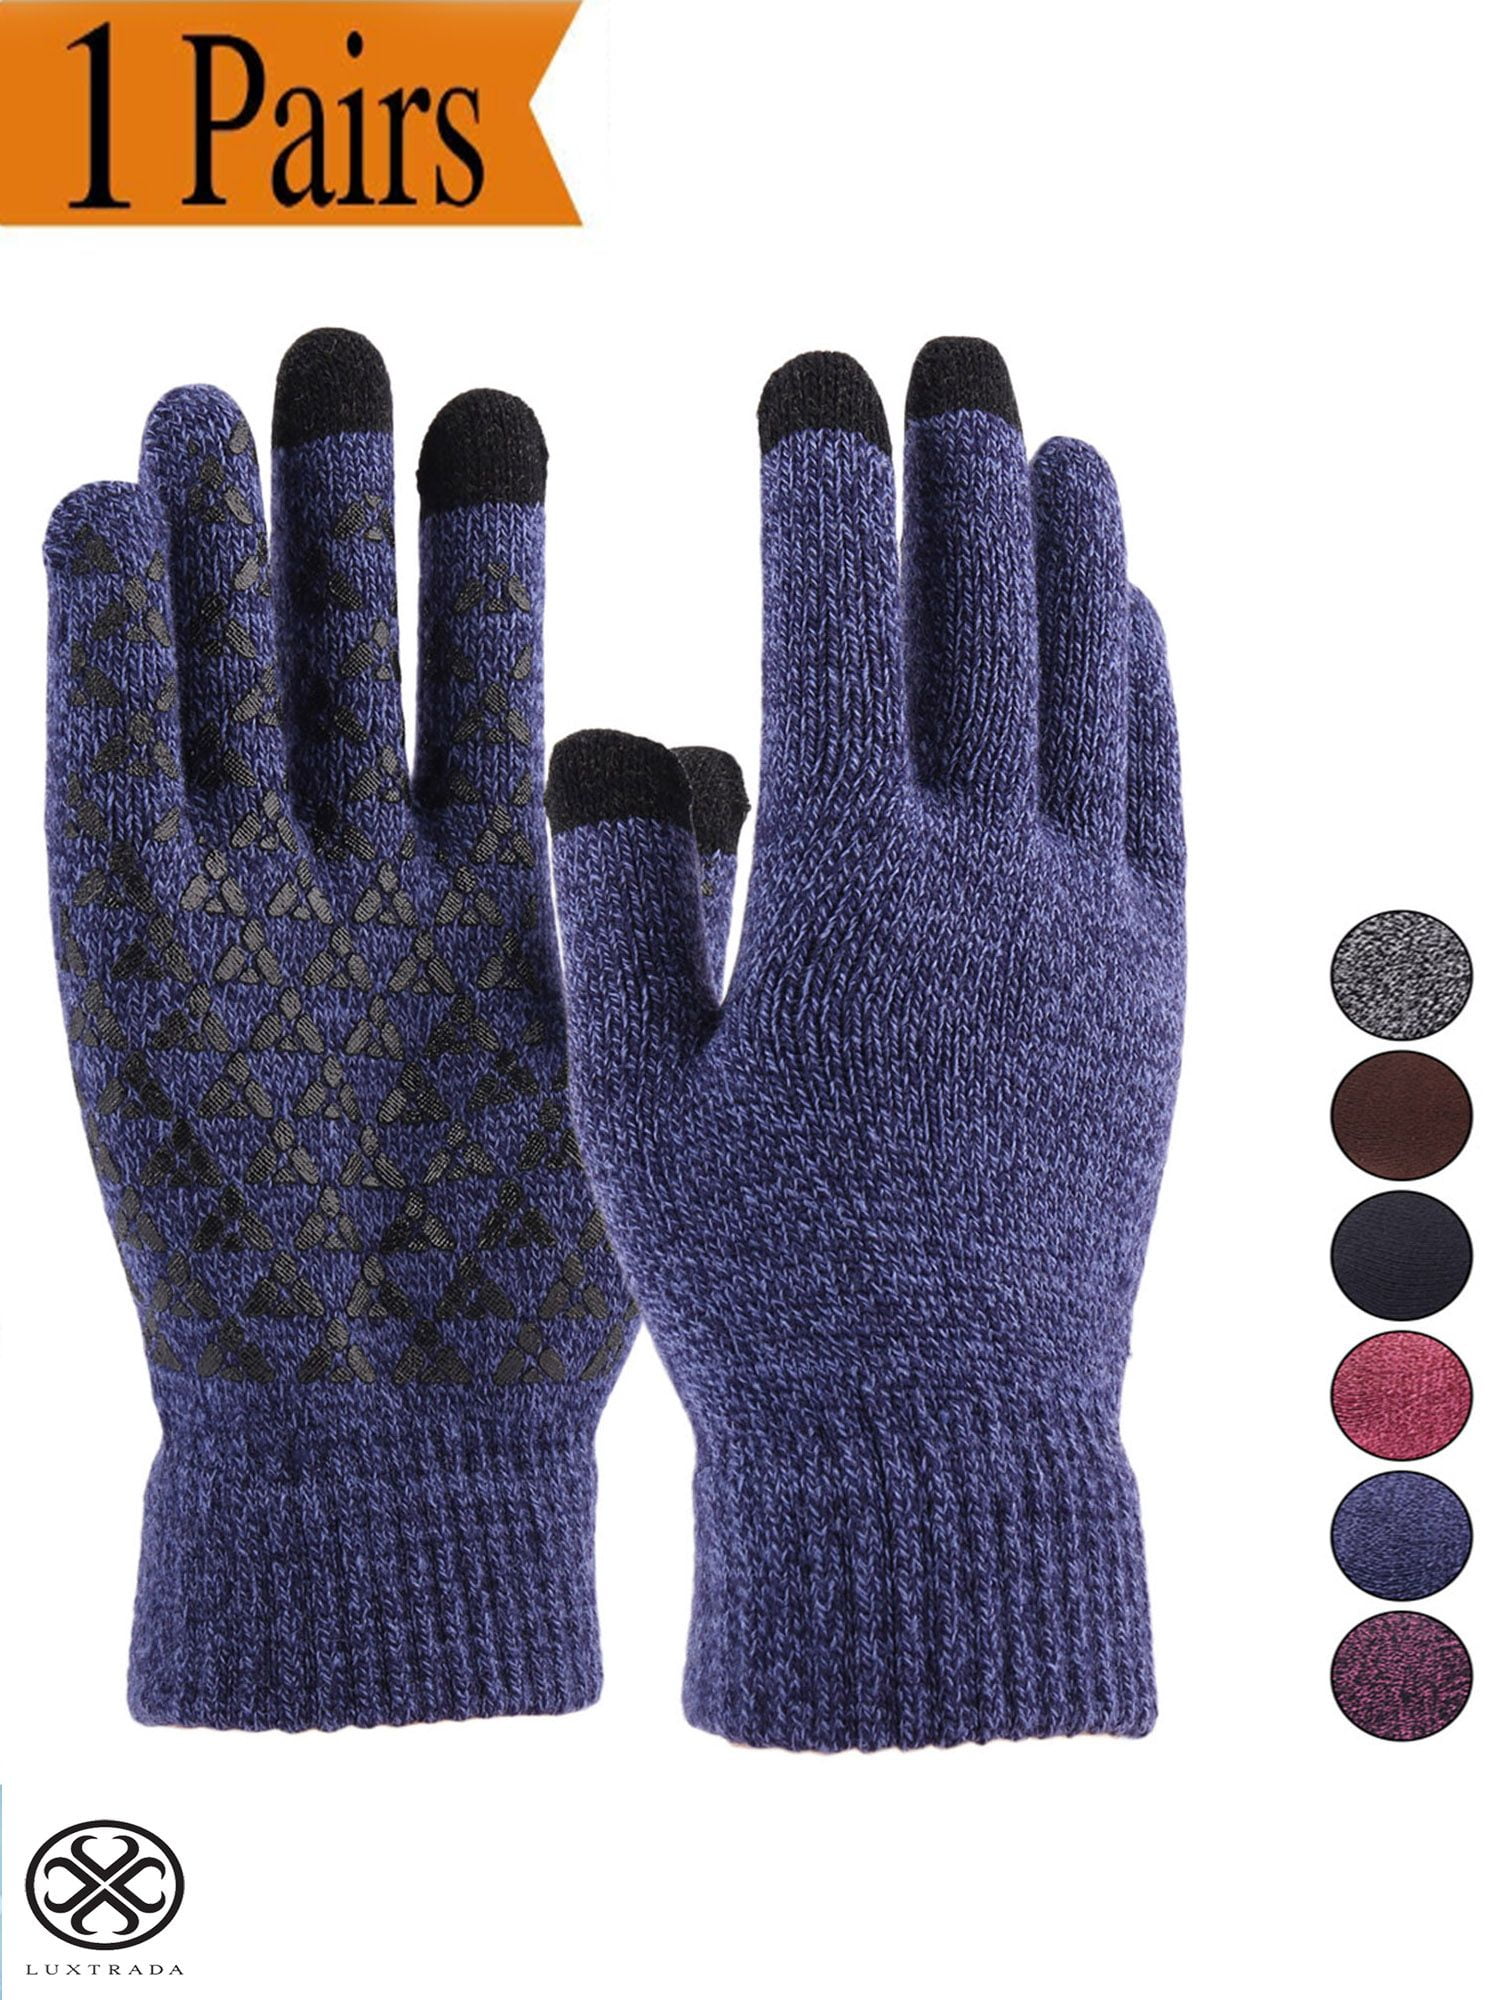 WOMENS LADIES DARK BLUE THERMAL KNITTED WINTER STRETCH GLOVES NEW 